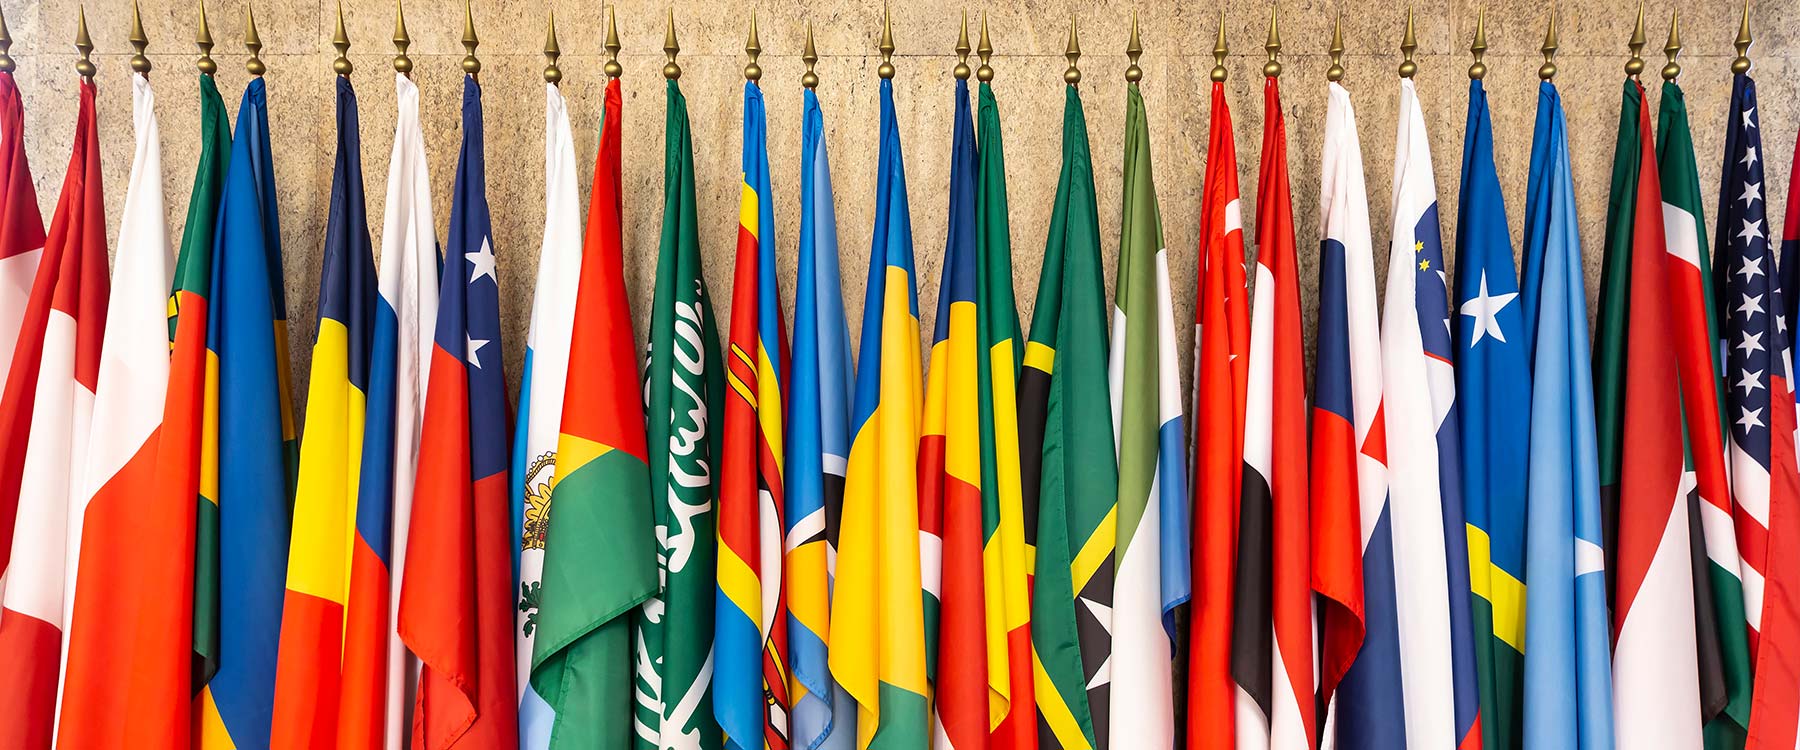 A colorful array of international flags.